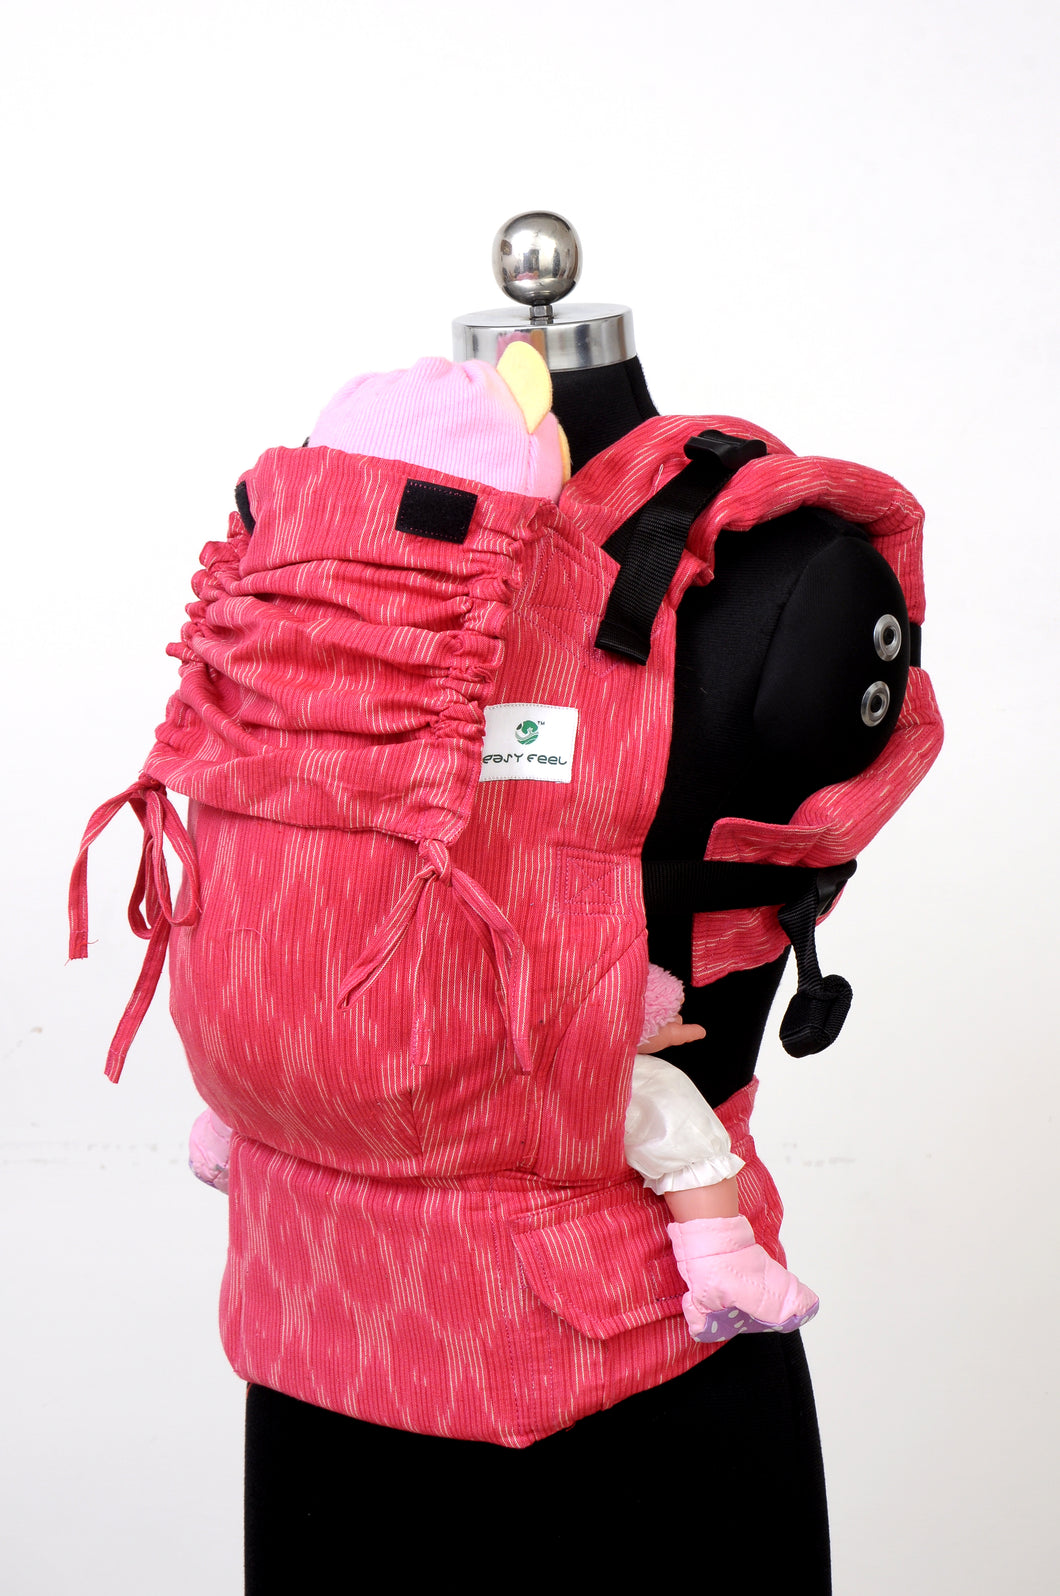 Toddler Wrap Converted Soft Structured Carrier - Blush